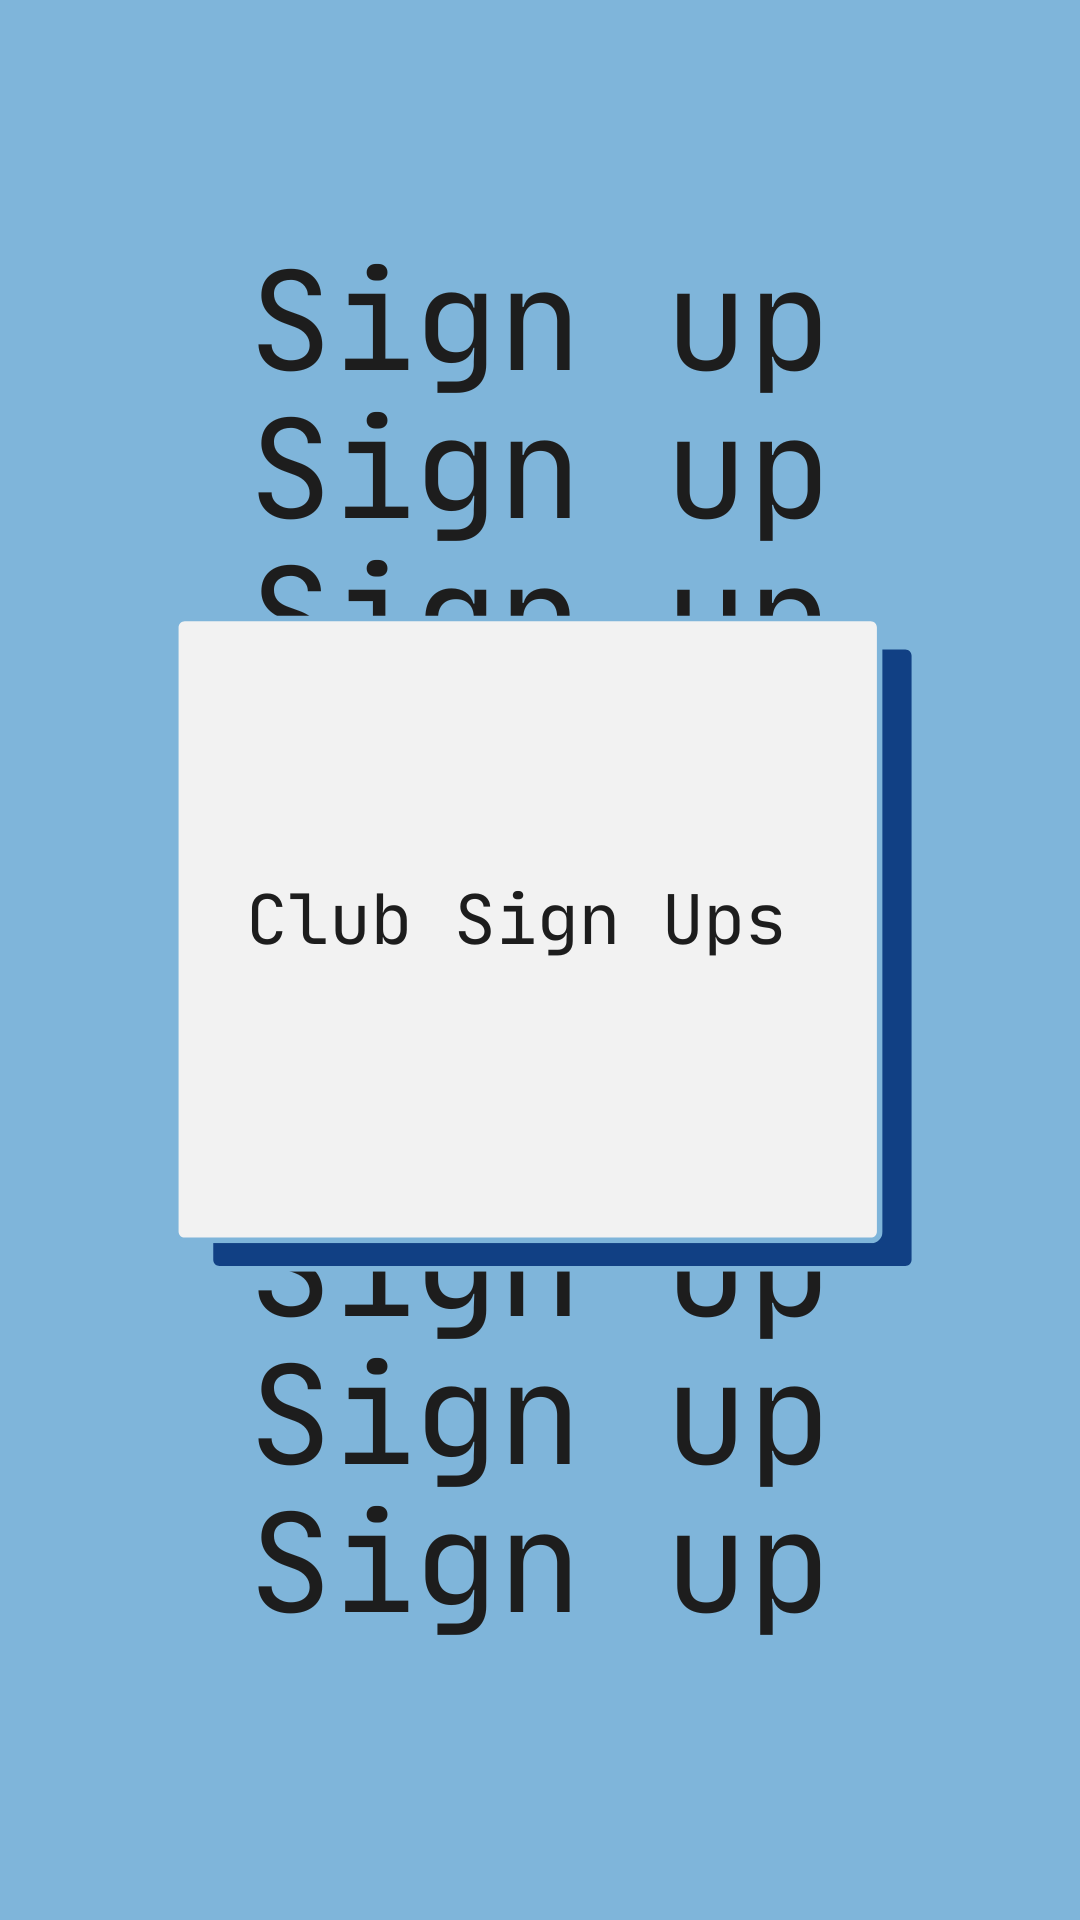 image of club sign ups